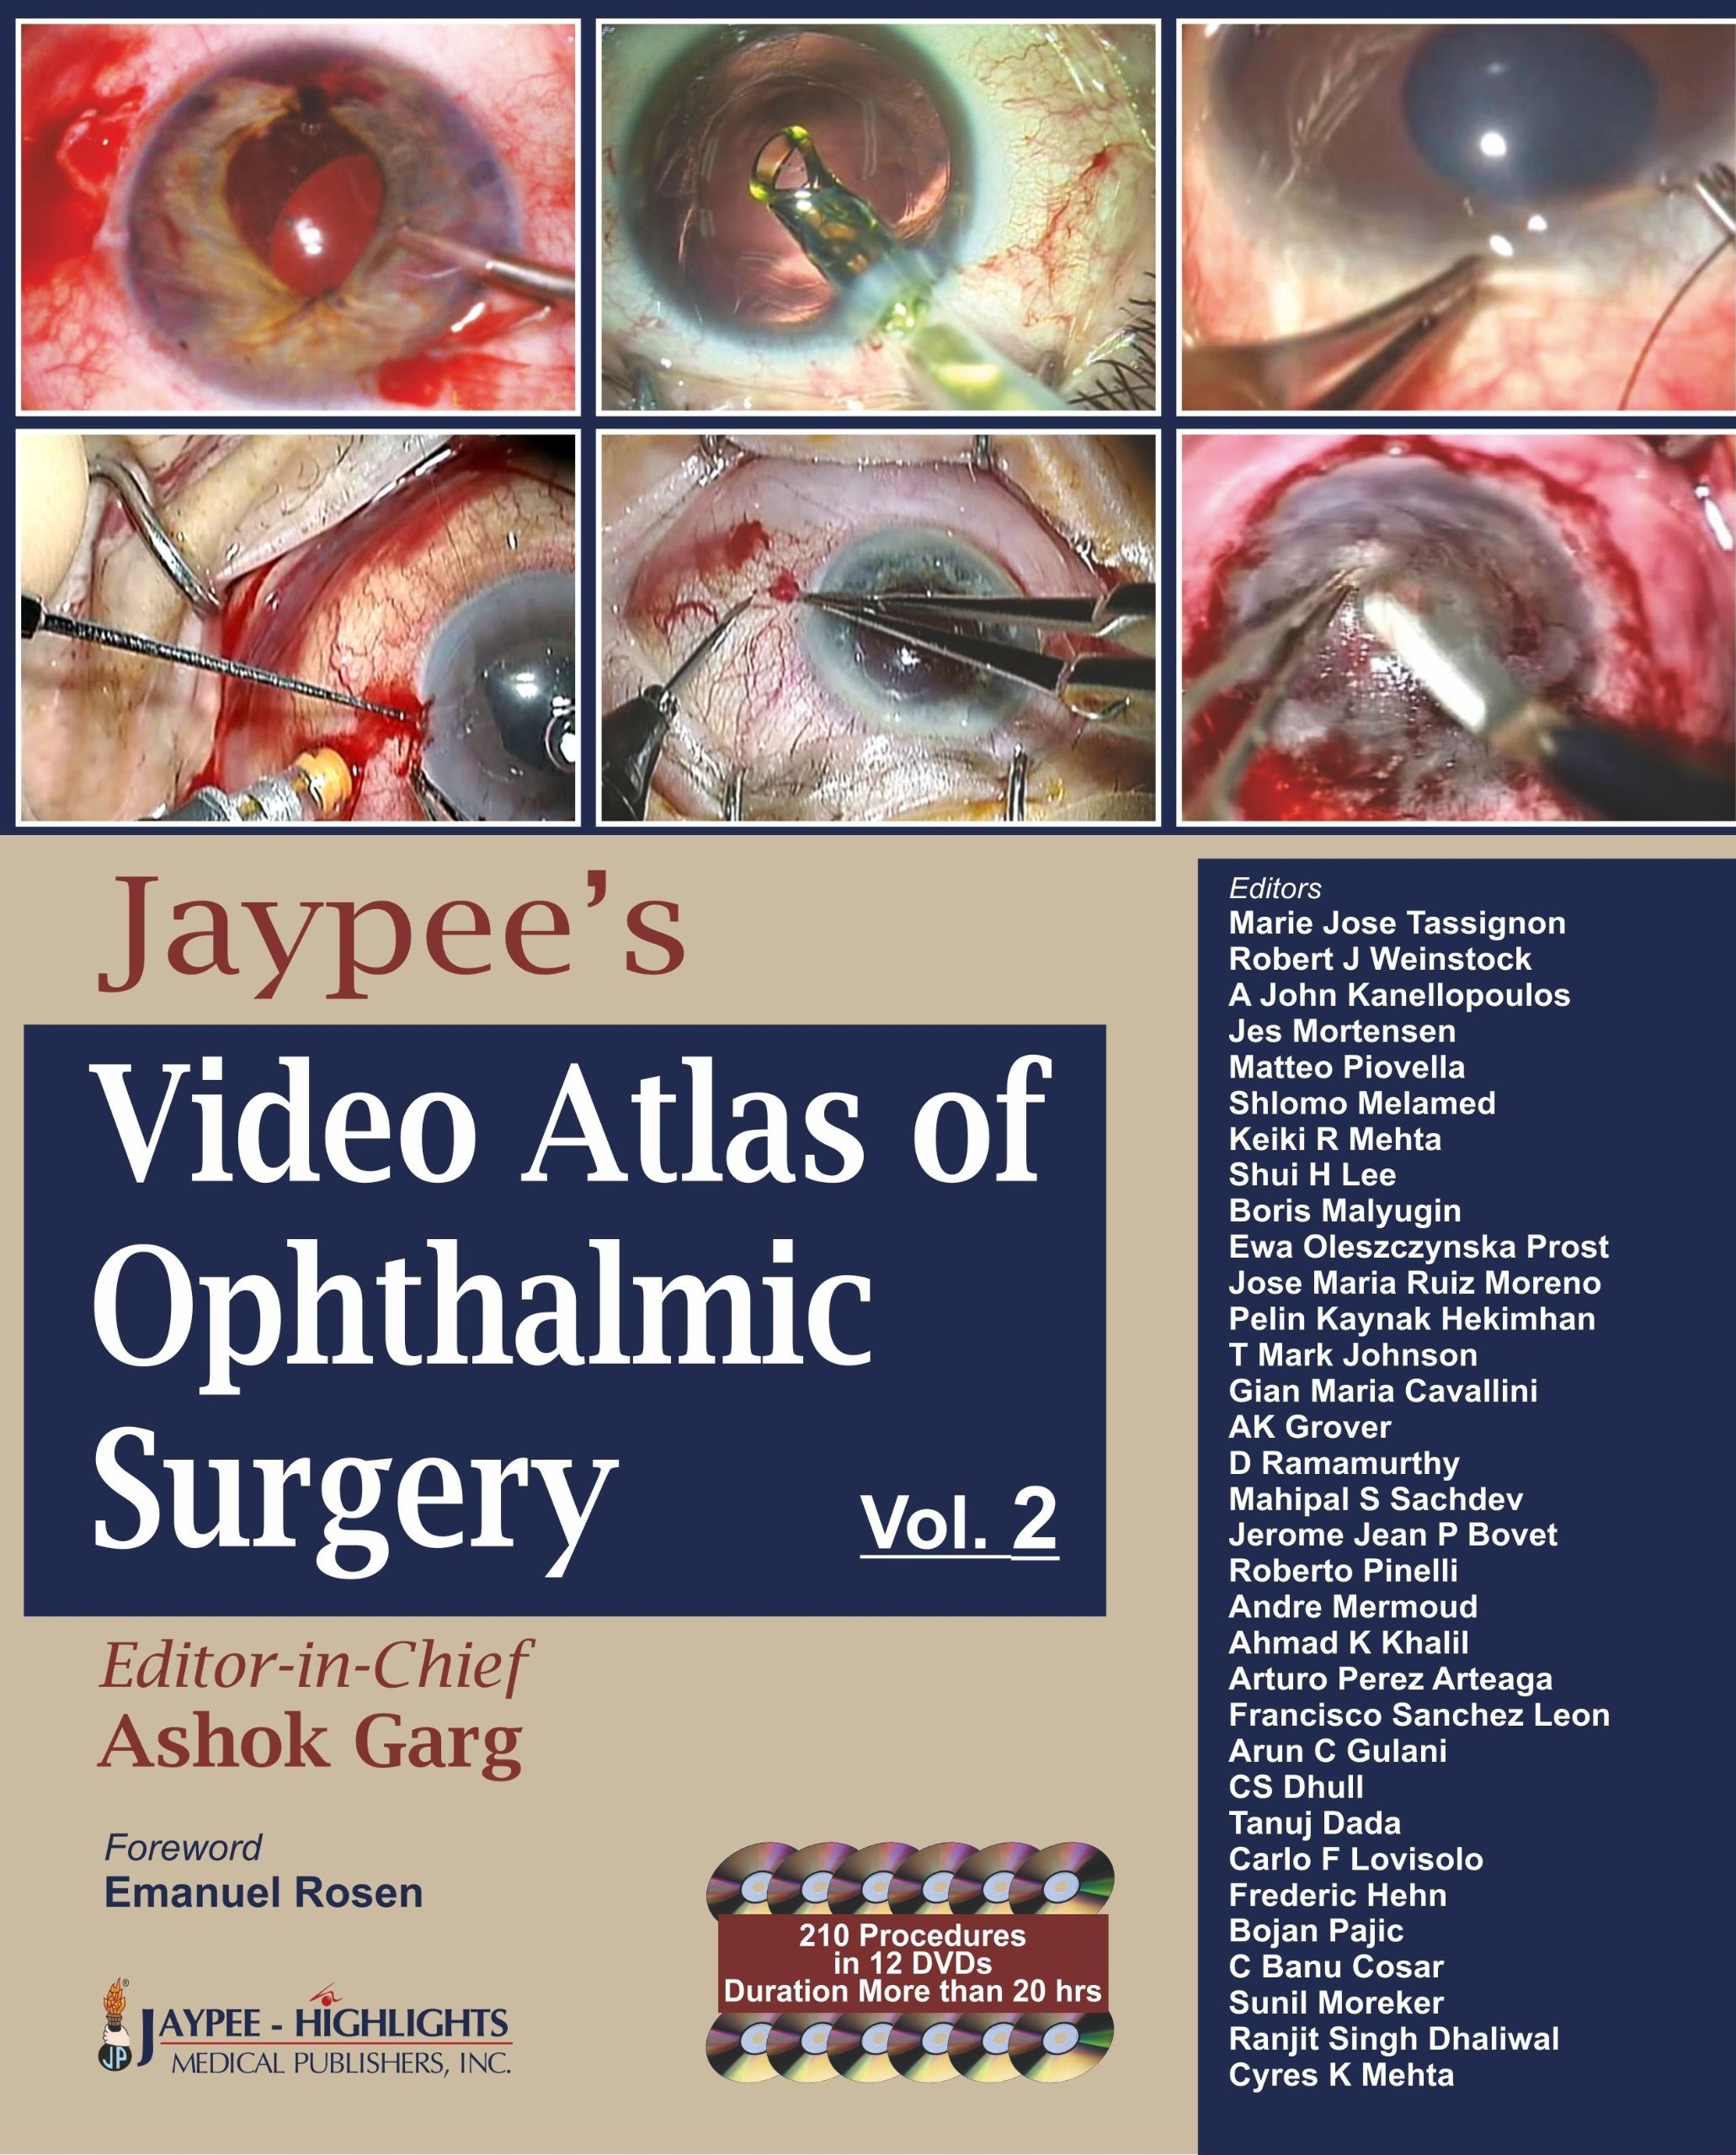 Jaypee'S Video Atlas Of Ophthalmic Surgery Vol.2 With 12 Dvd Roms